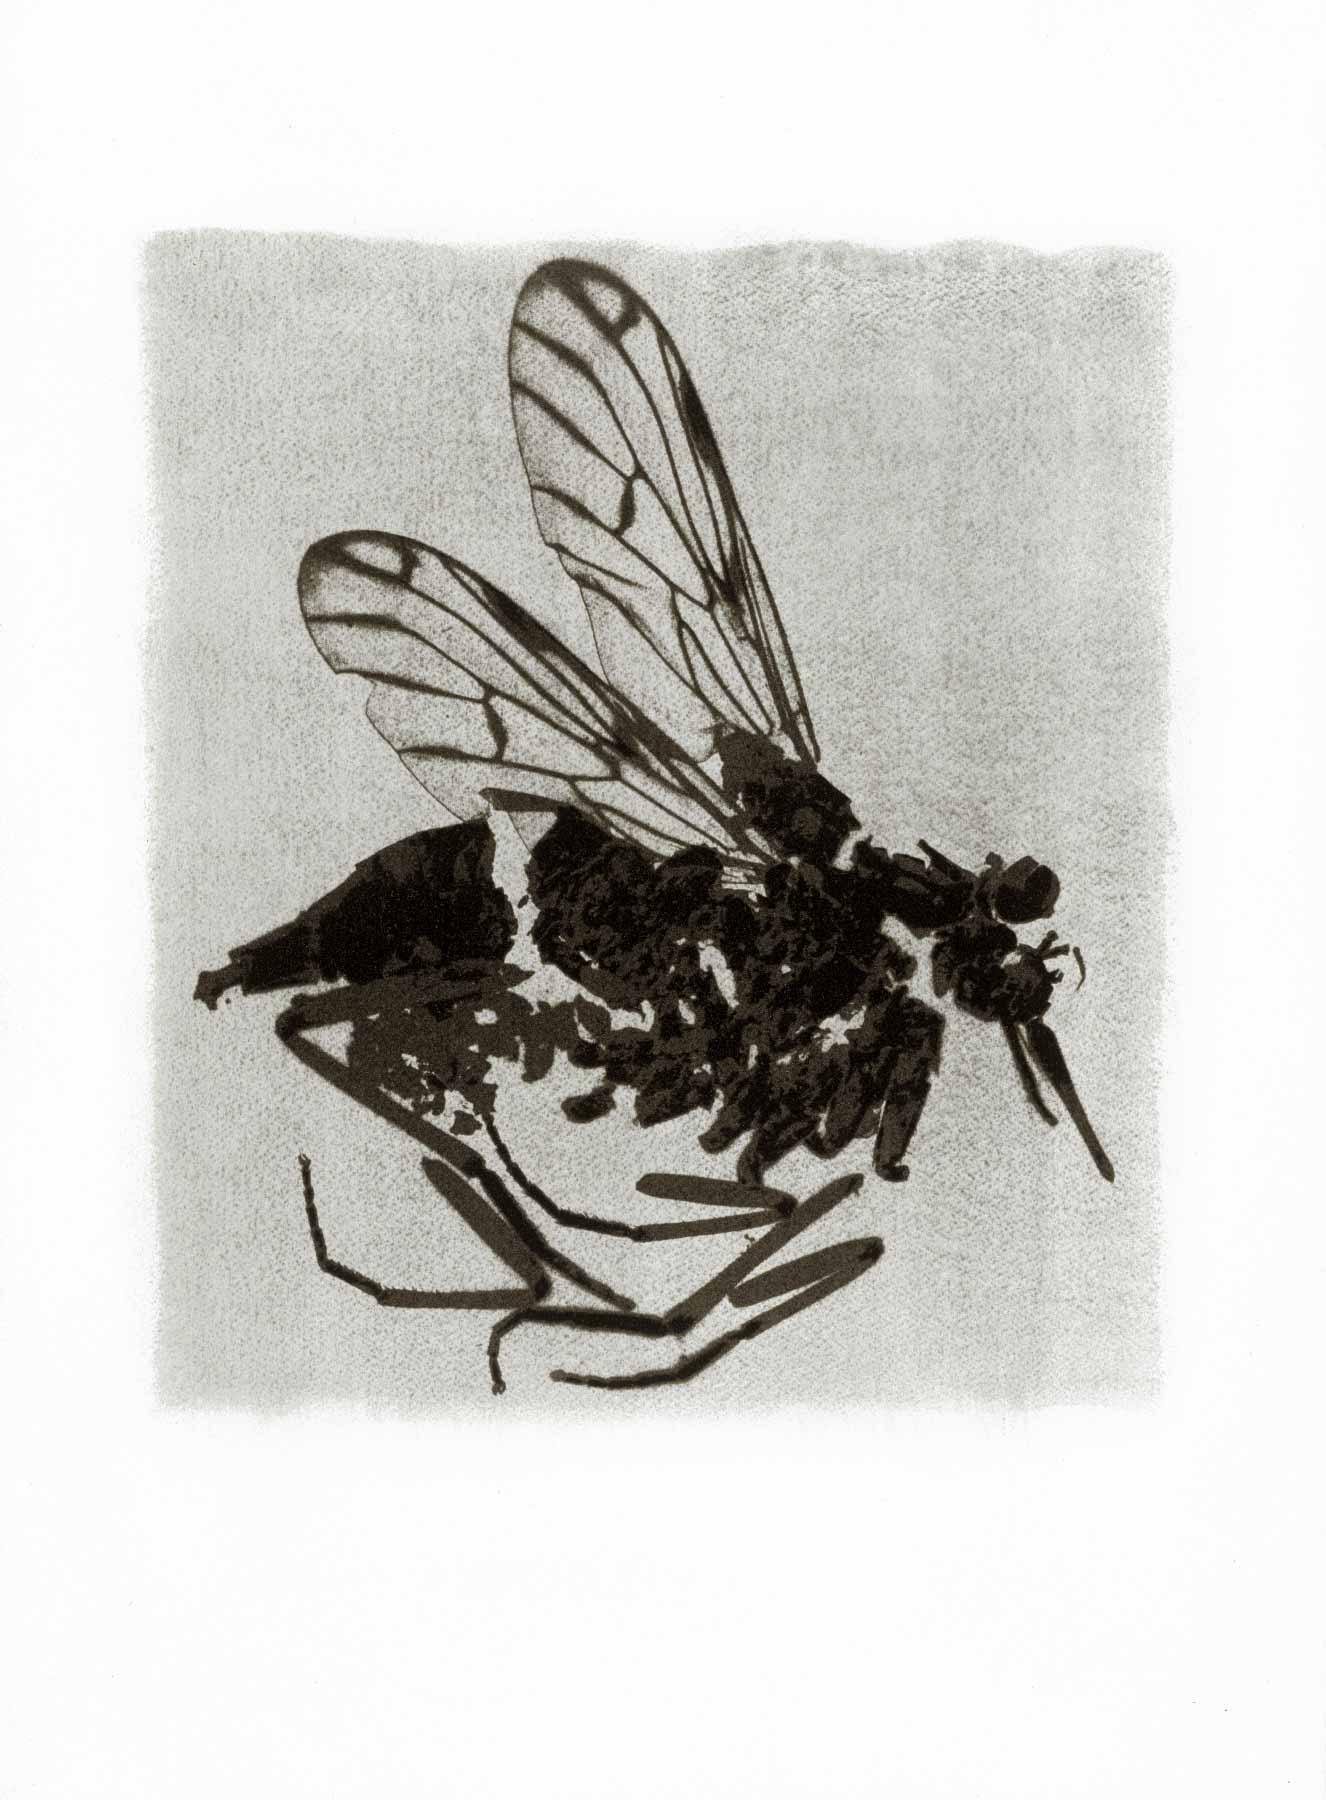 Gum bichromate insect - Bee Flie 1994